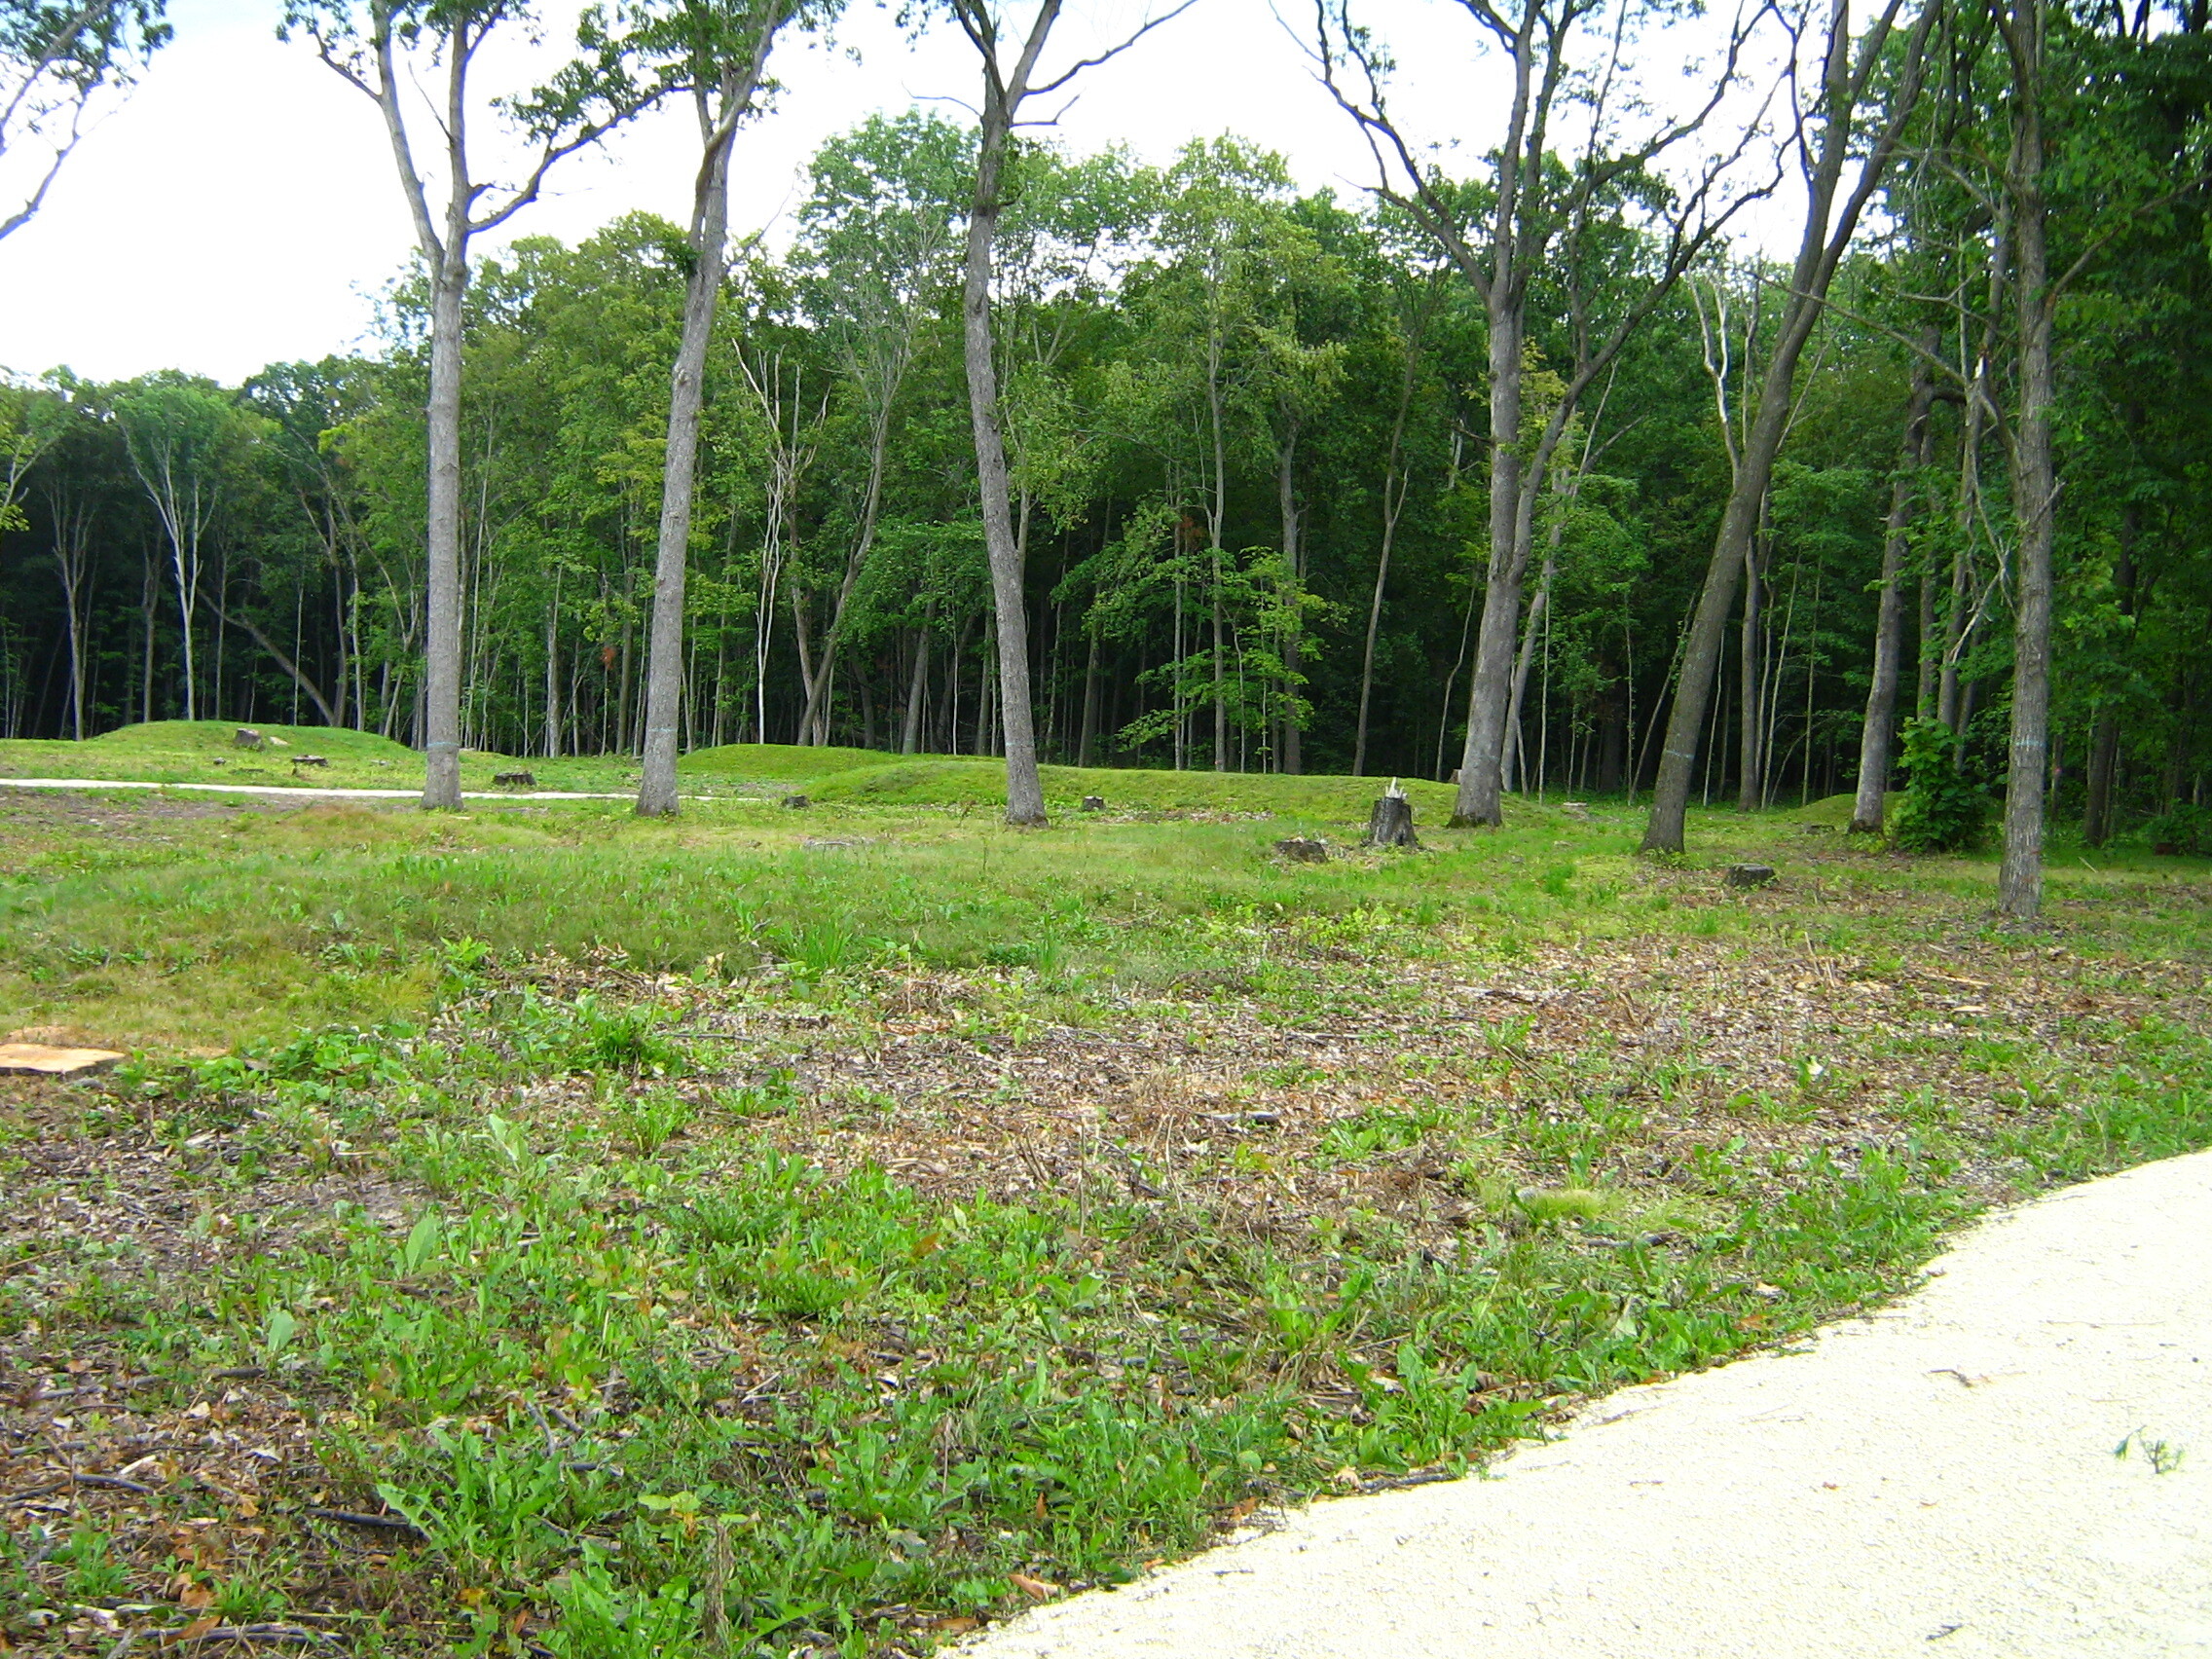 Lizard Mound will be Wisconsin’s newest state park